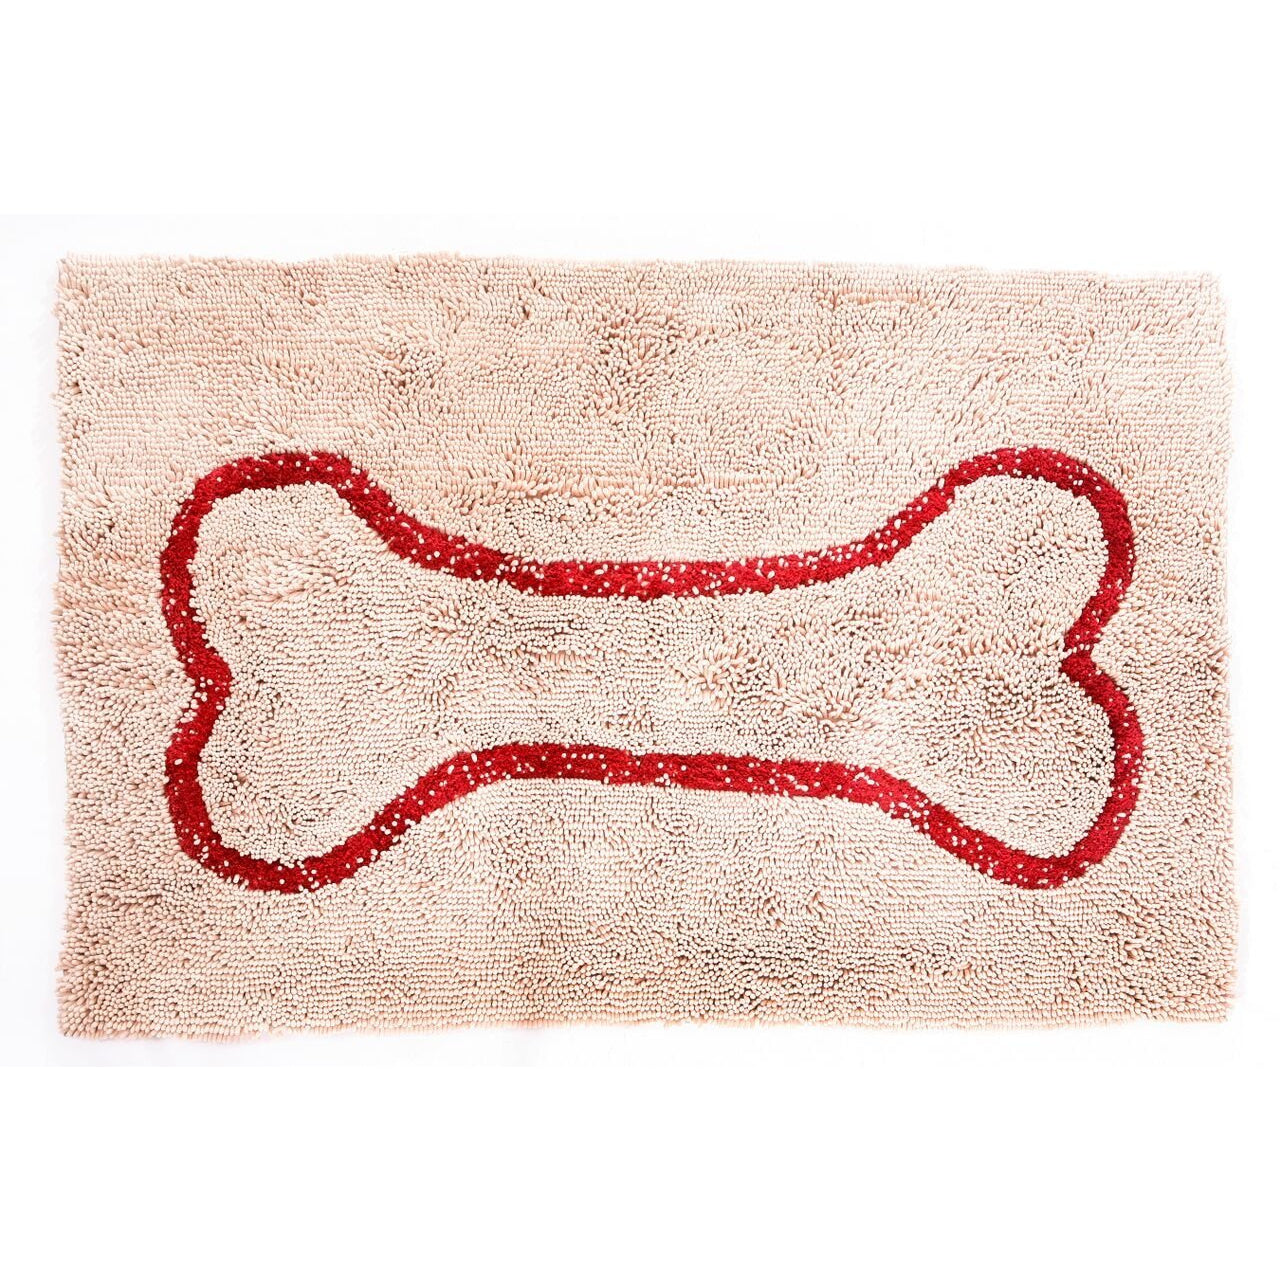 Soggy Doggy - Super Absorbent Doormat, Large, Beige